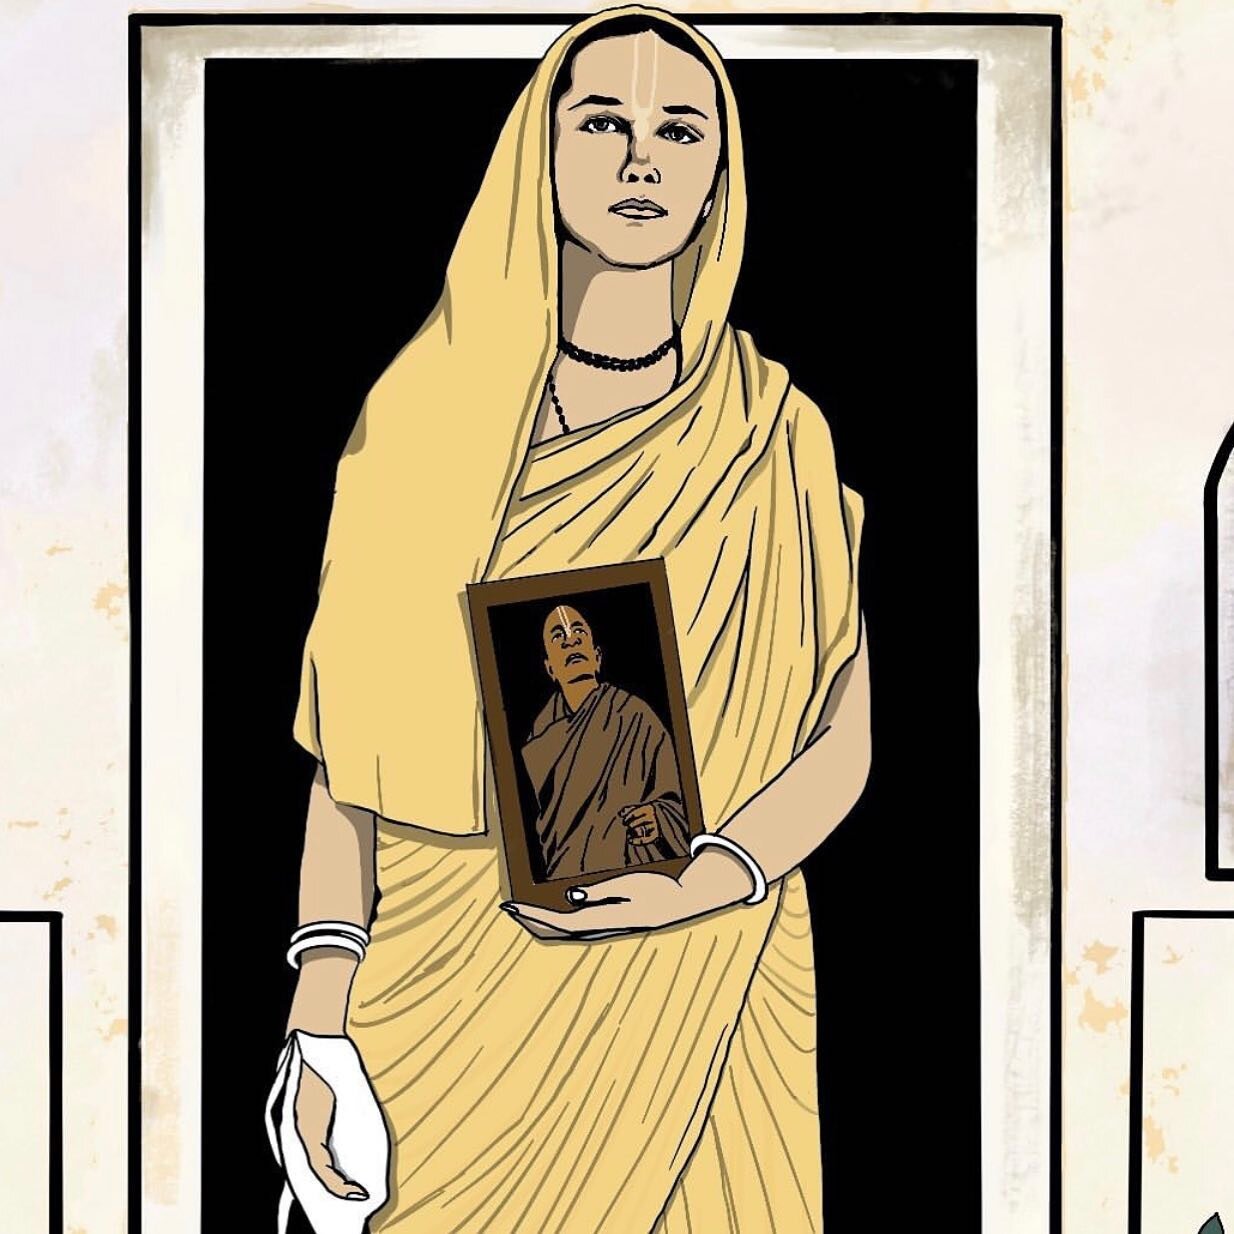 this is a beautiful illustration of Yamuna Devi Dasi by @hi_iamkaveri. 

i've been reflecting today on what it truly means to serve. the mood of Yamuna dd was not to hoard her blessings from her dear beloved teacher, but to LET GO &amp; share them op